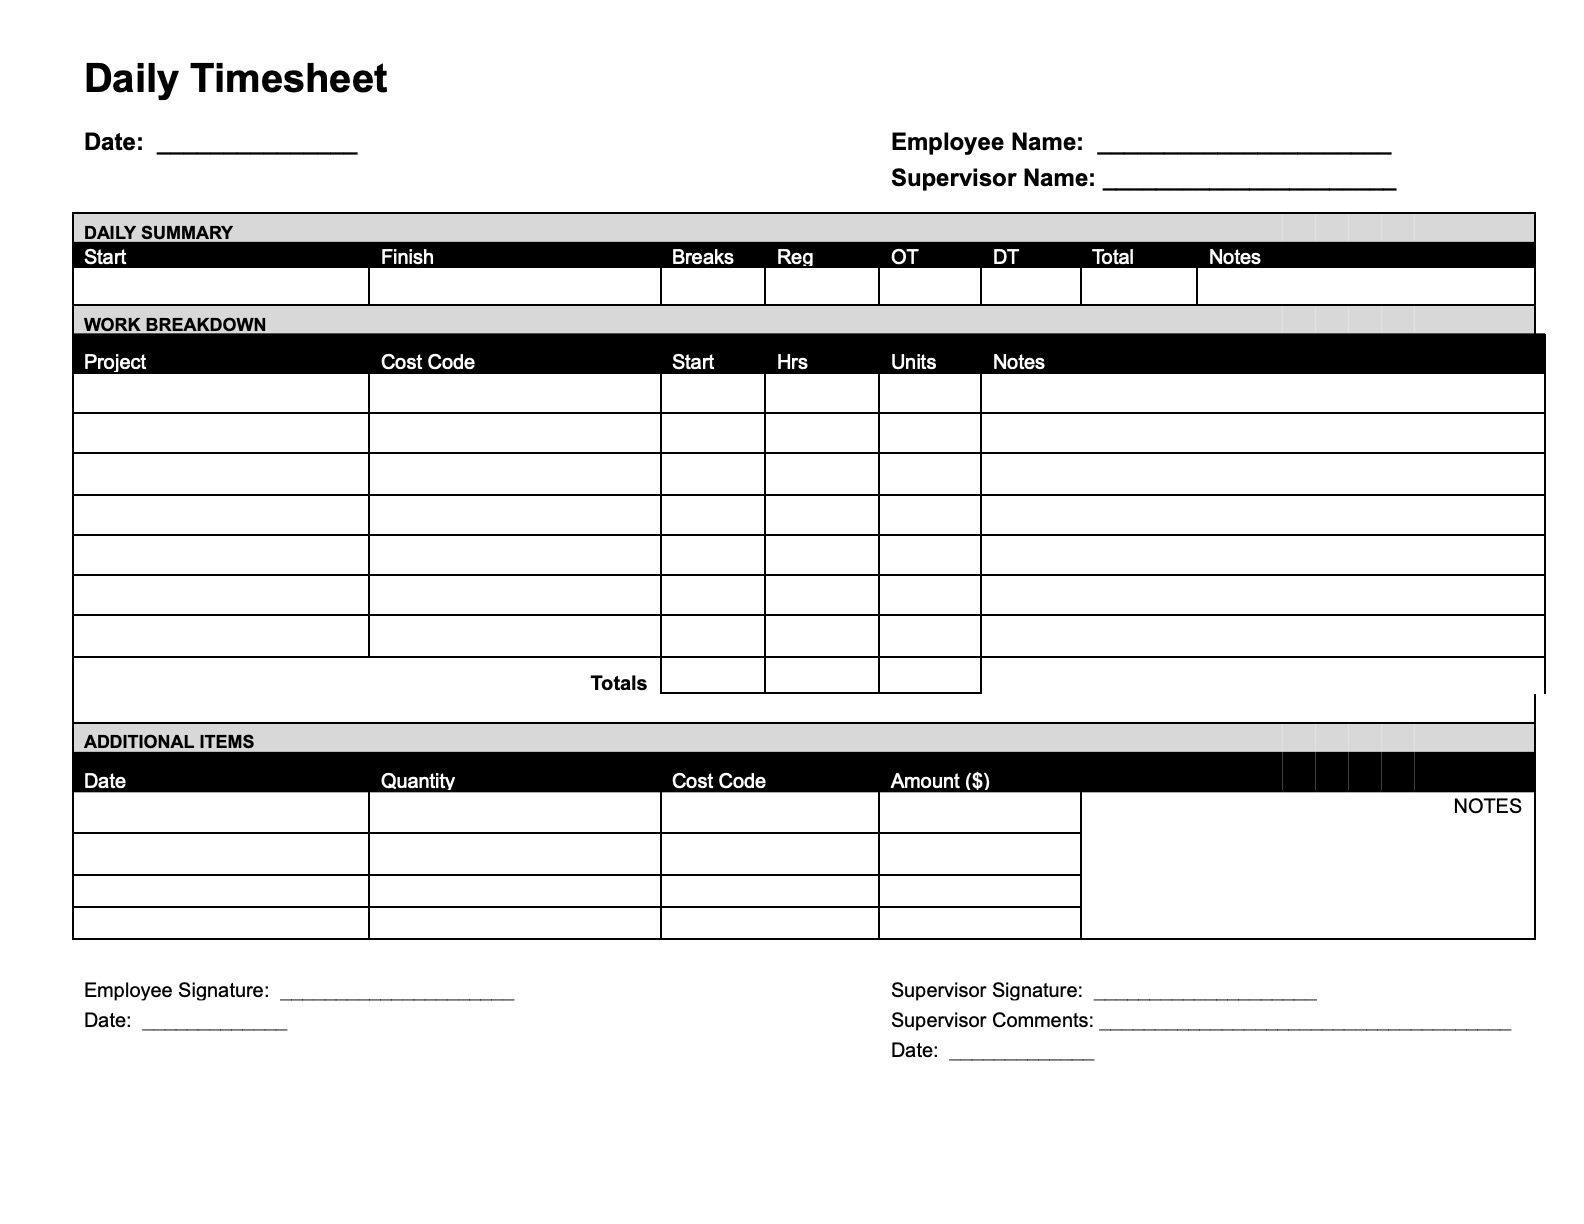 Daily Construction Timesheet Template